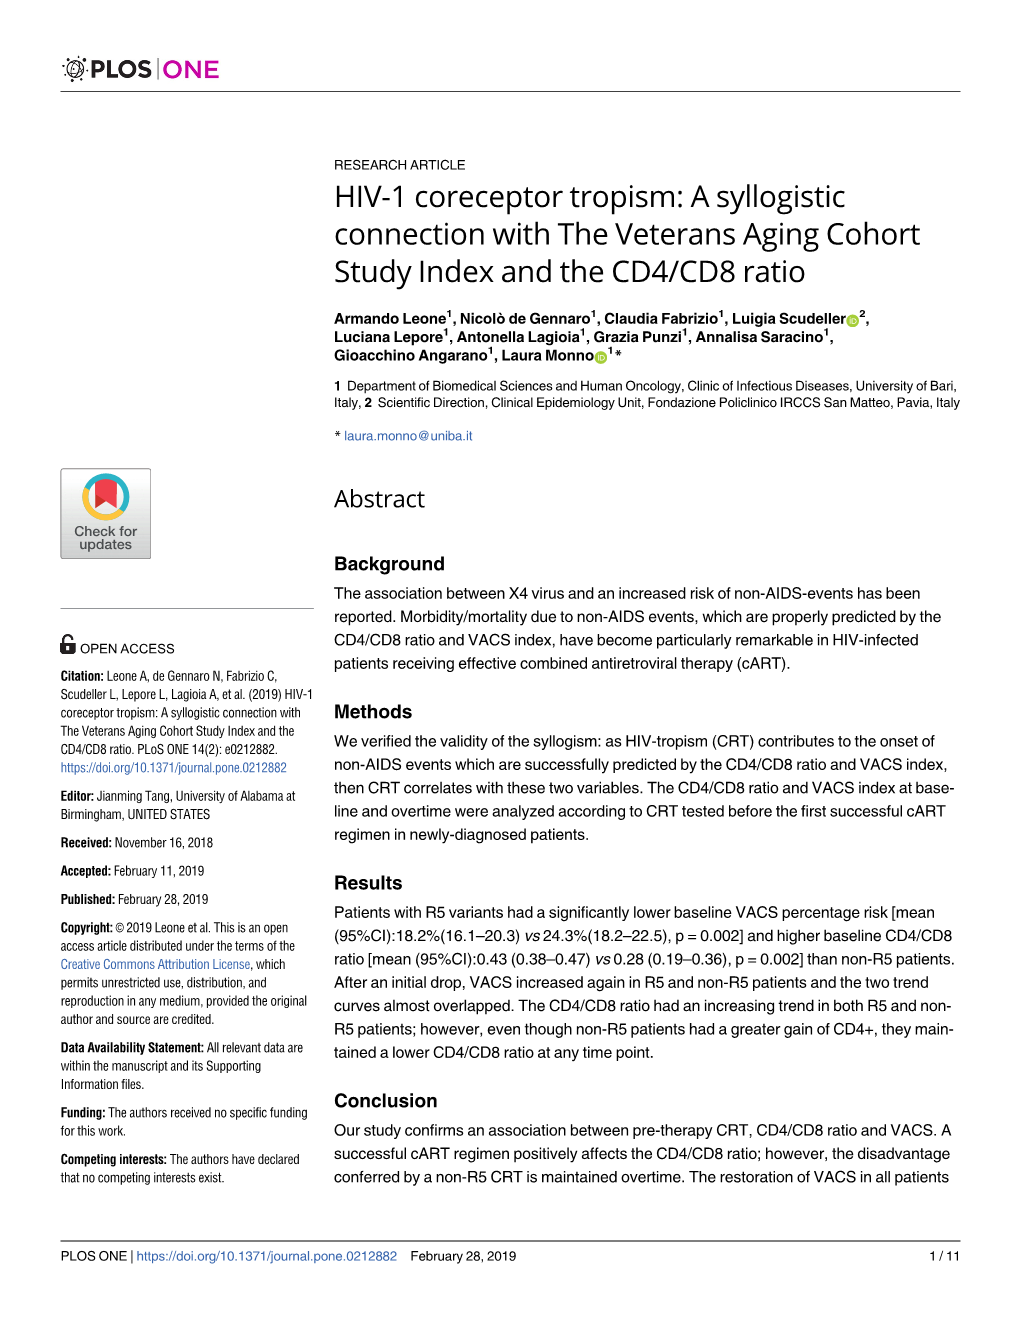 HIV-1 Coreceptor Tropism: a Syllogistic Connection with the Veterans Aging Cohort Study Index and the CD4/CD8 Ratio